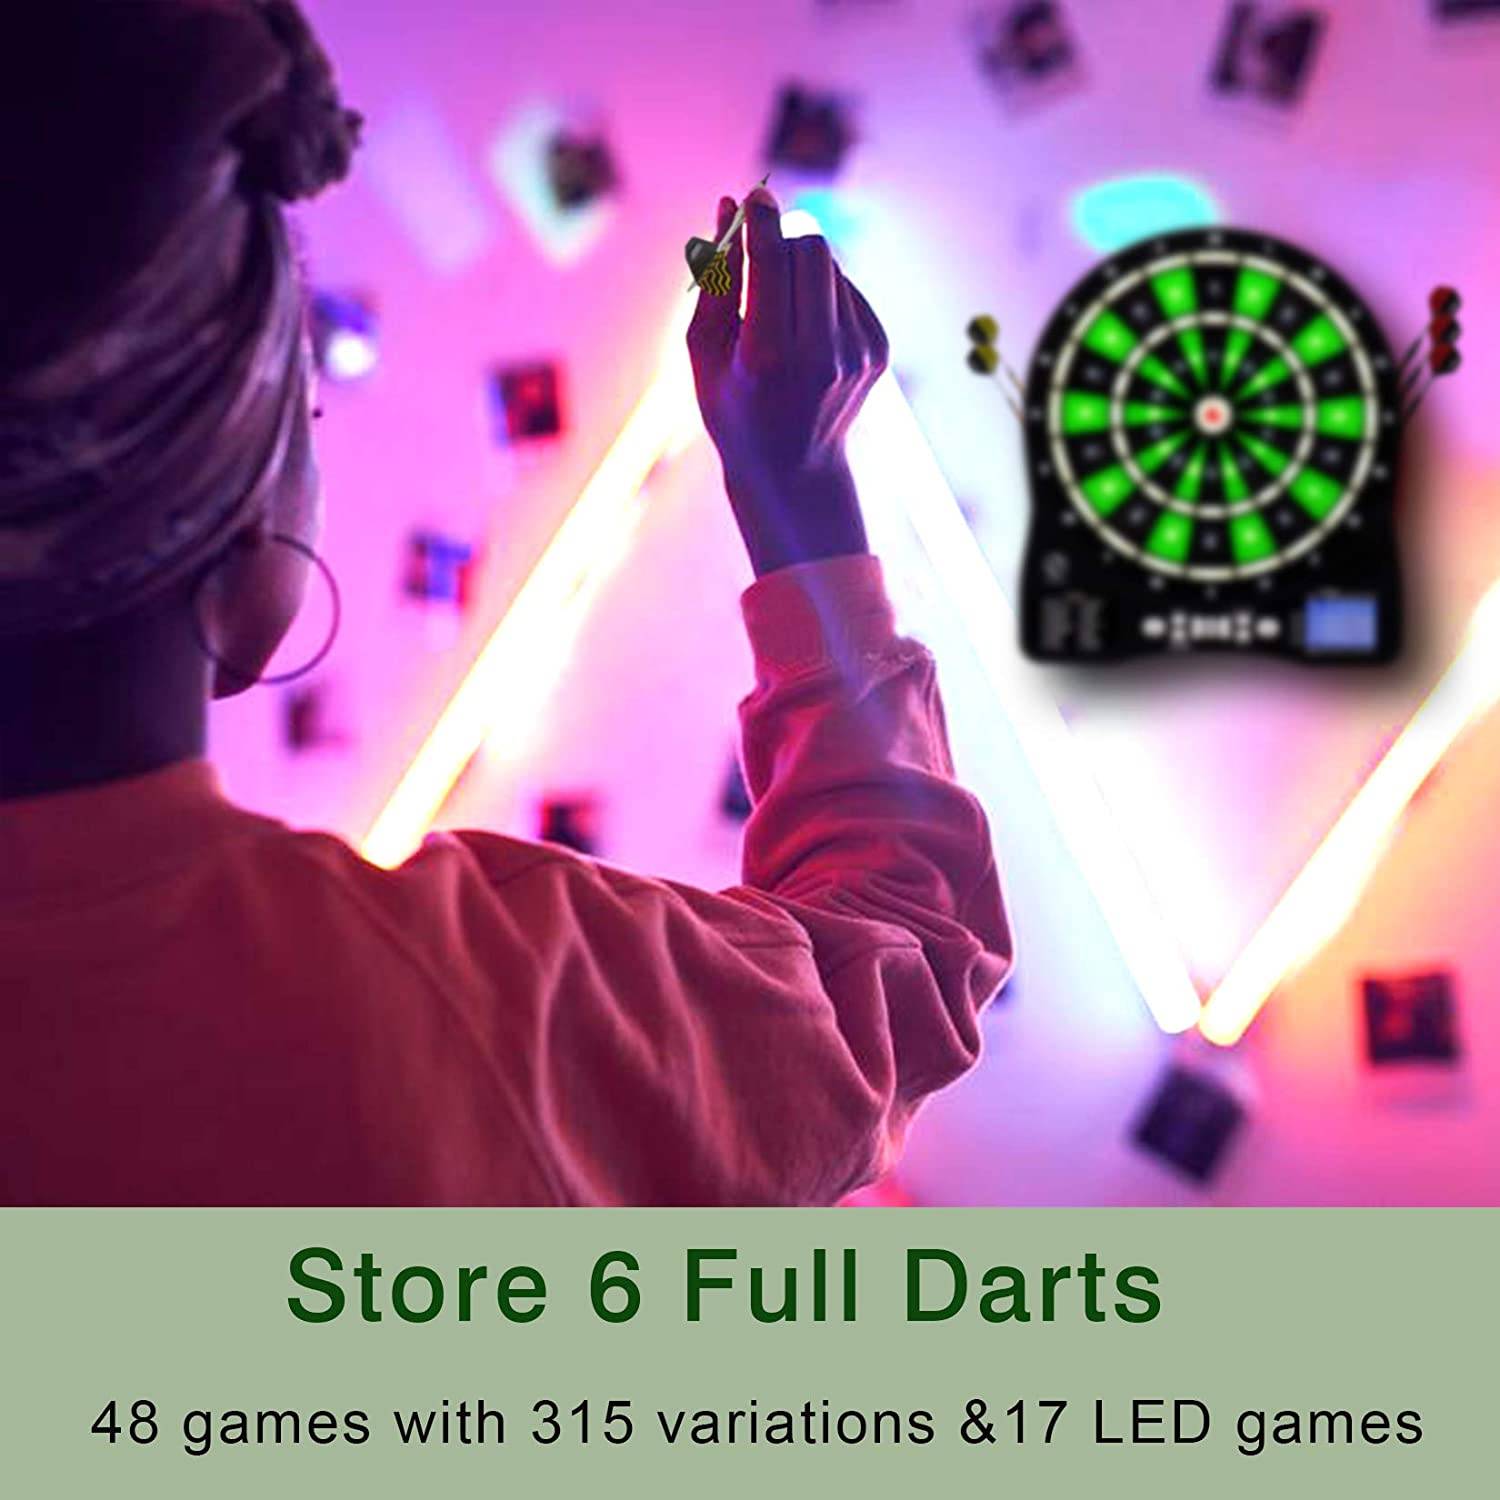 https://www.winmaxdartgame.com/13-inch-best-cheap-dartboard-with-electronic-scoring-win-max-product/